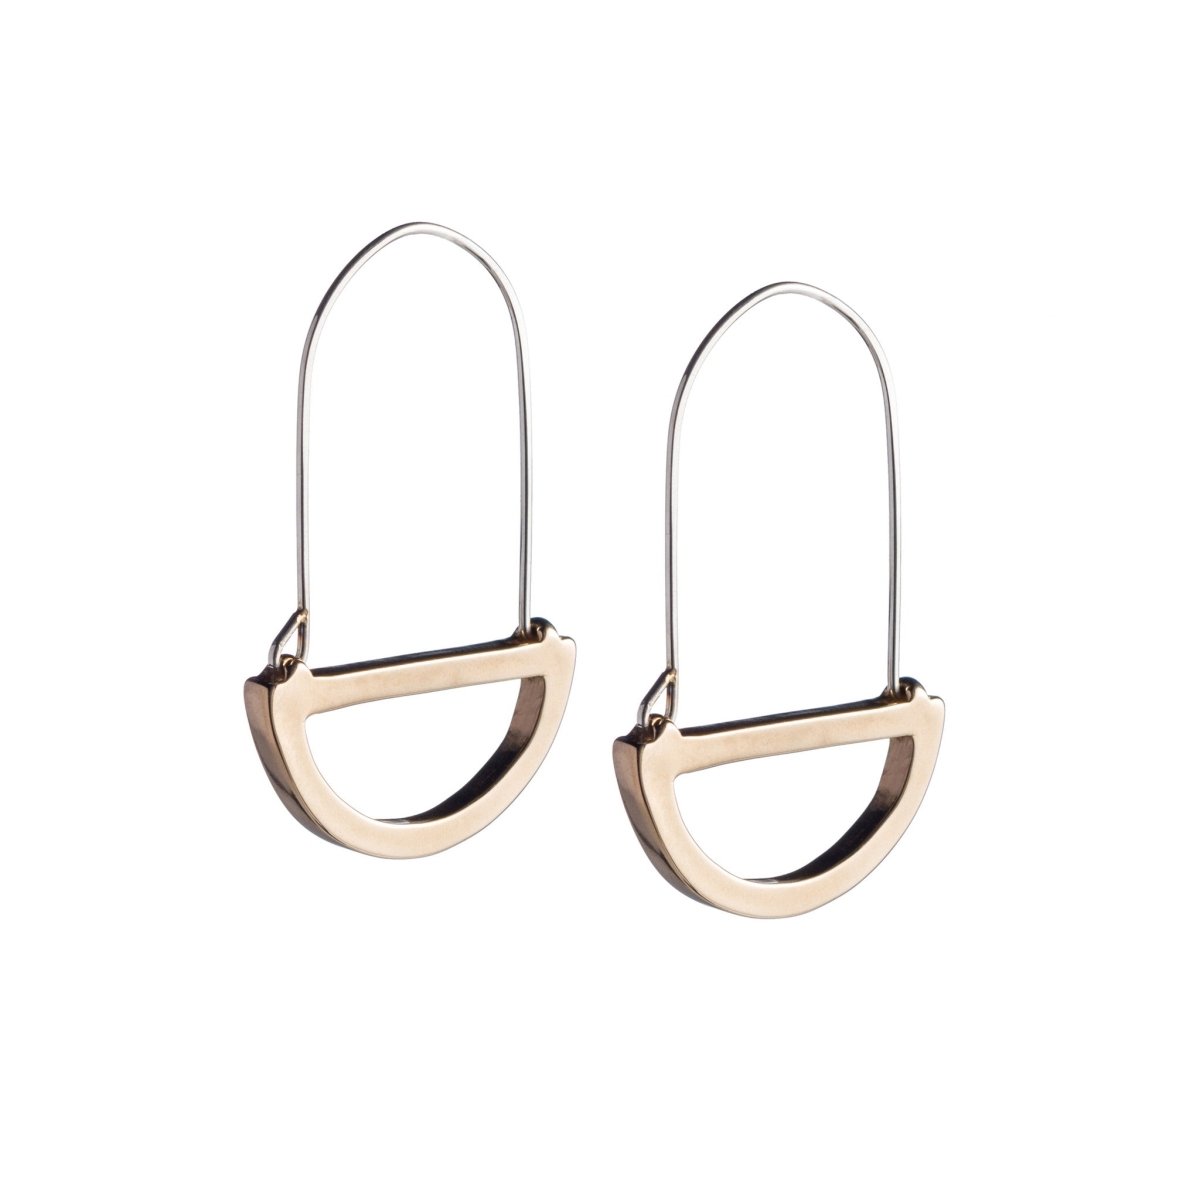 Modern, polished, cast bronze semicircle pendants hanging below long, hand-formed, sterling silver hoops. Hand-crafted in Portland, Oregon.